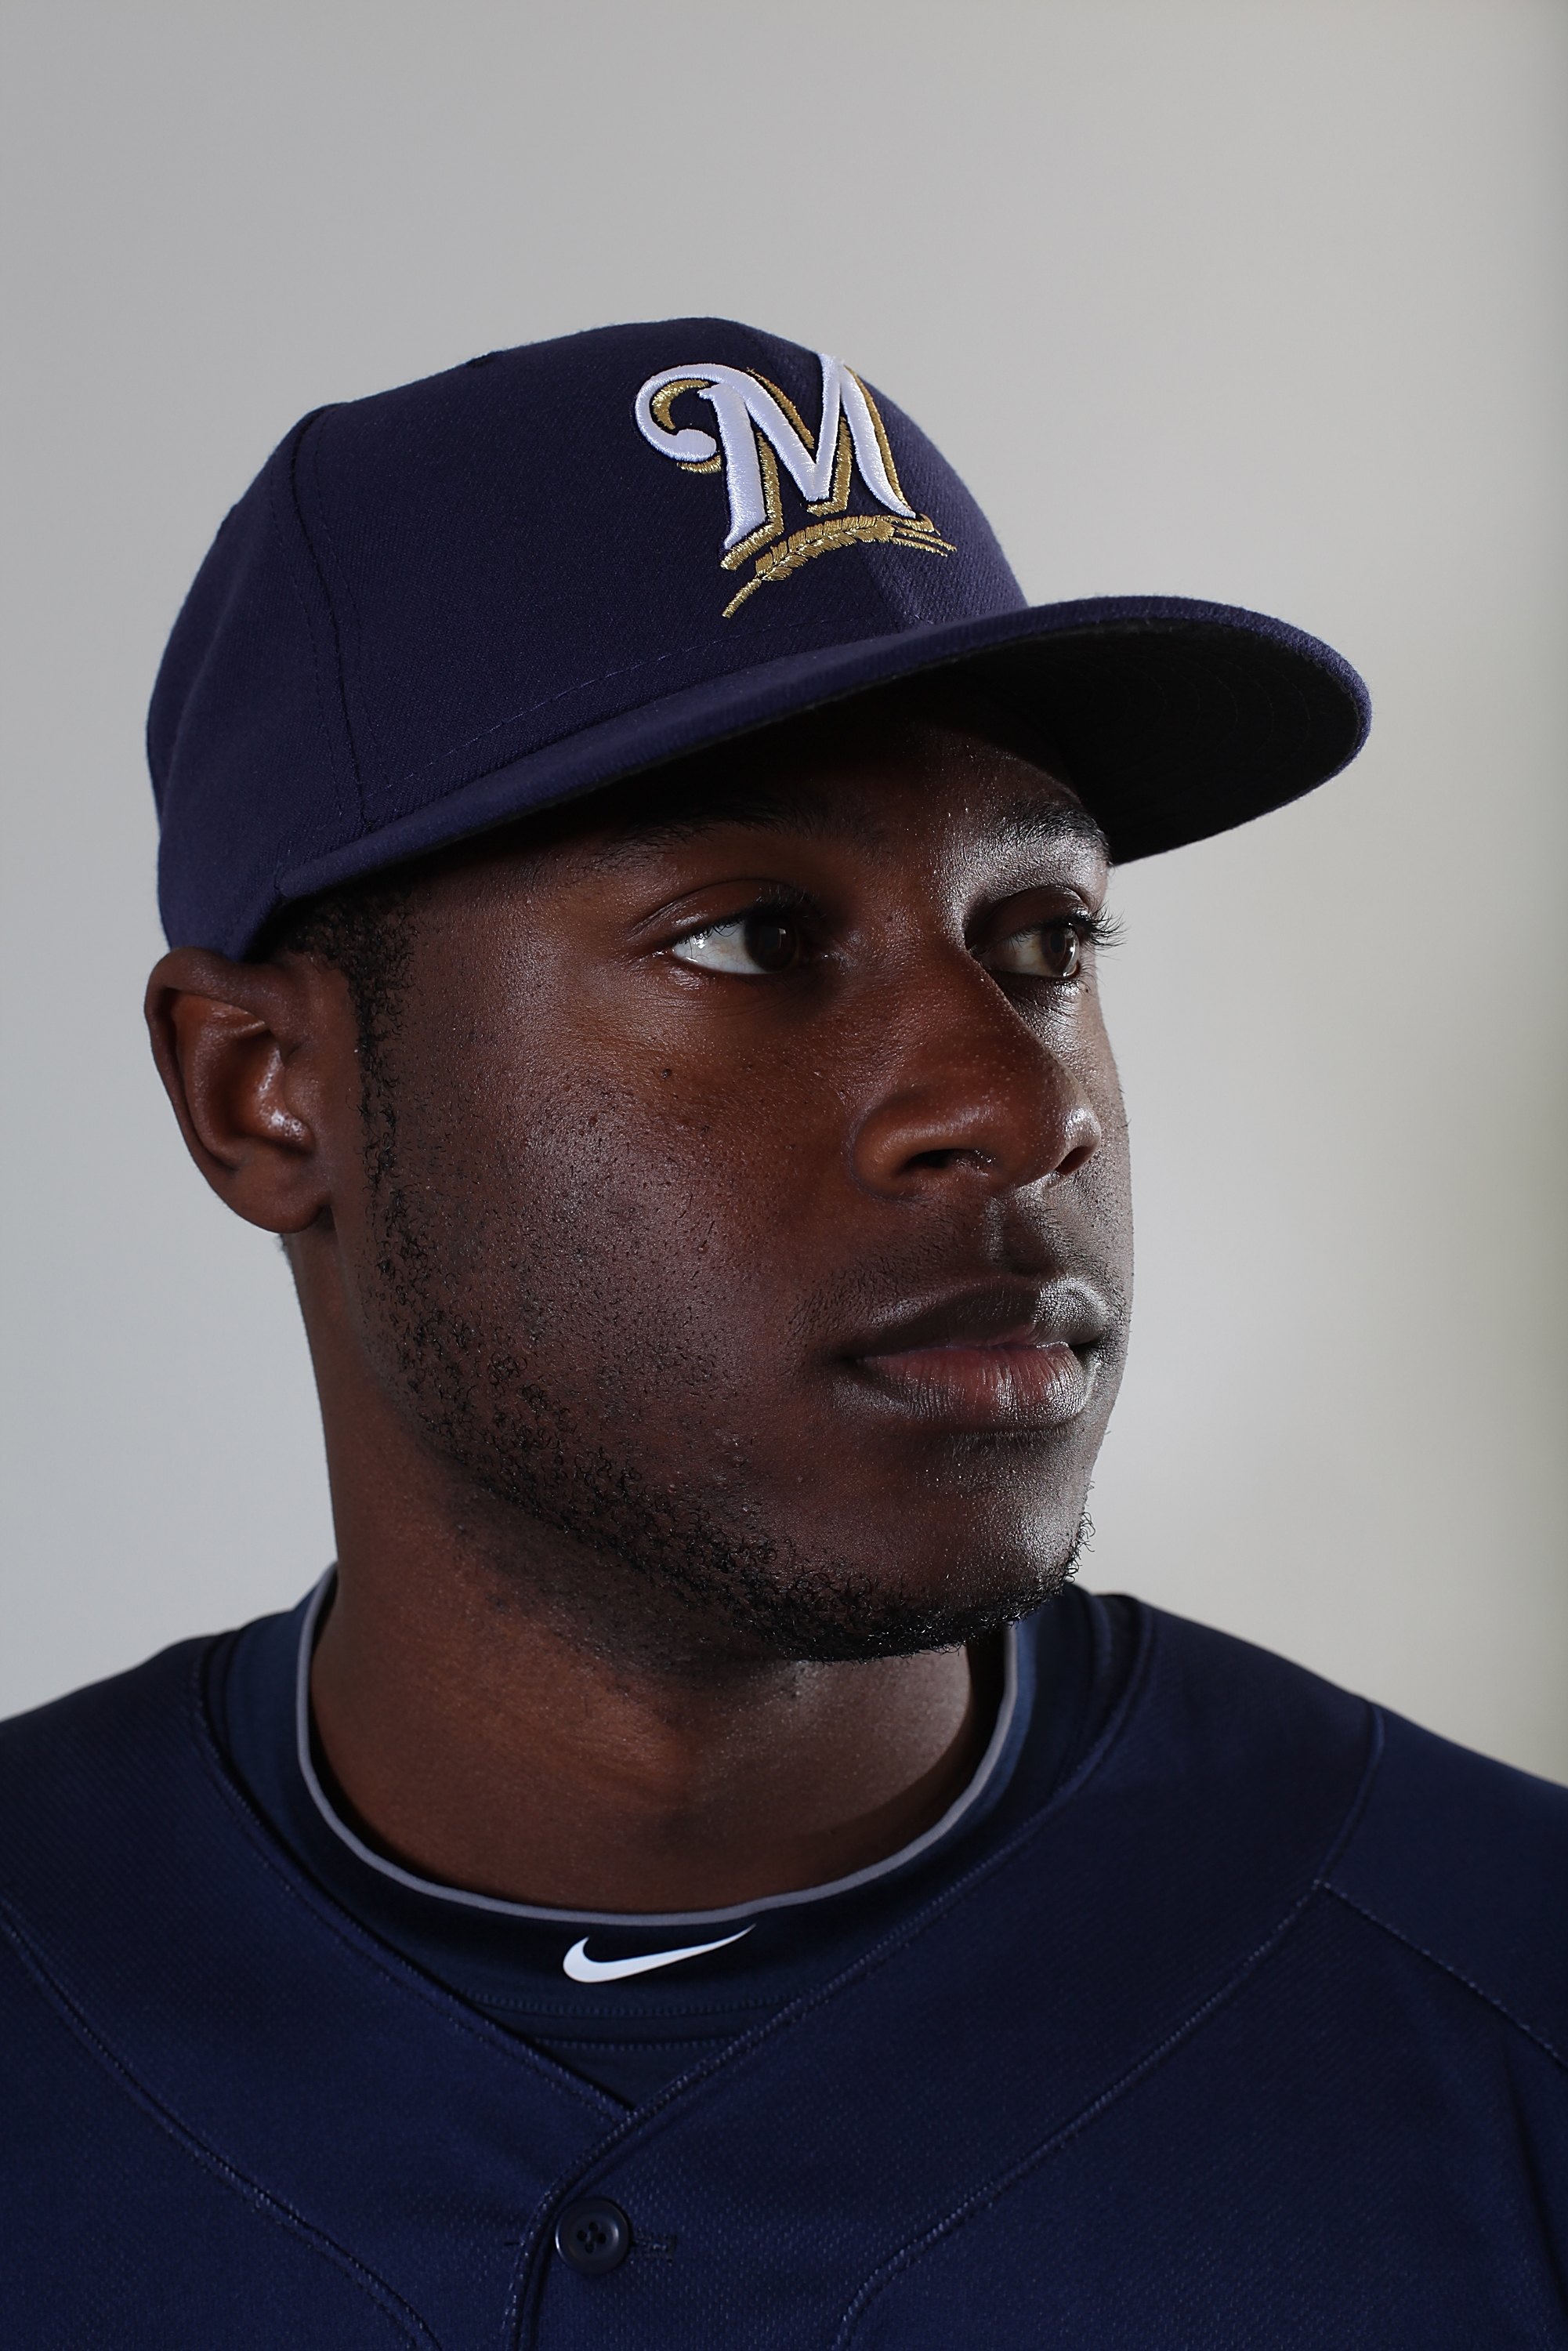 MARYVALE, AZ - MARCH 01:  Lorenzo Cain #36 poses for a portrait during the Milwaukee Brewers Photo Day at the Maryvale  Baseball Park on March 1, 2010 in Maryvale, Arizona.  (Photo by Jonathan Ferrey/Getty Images)